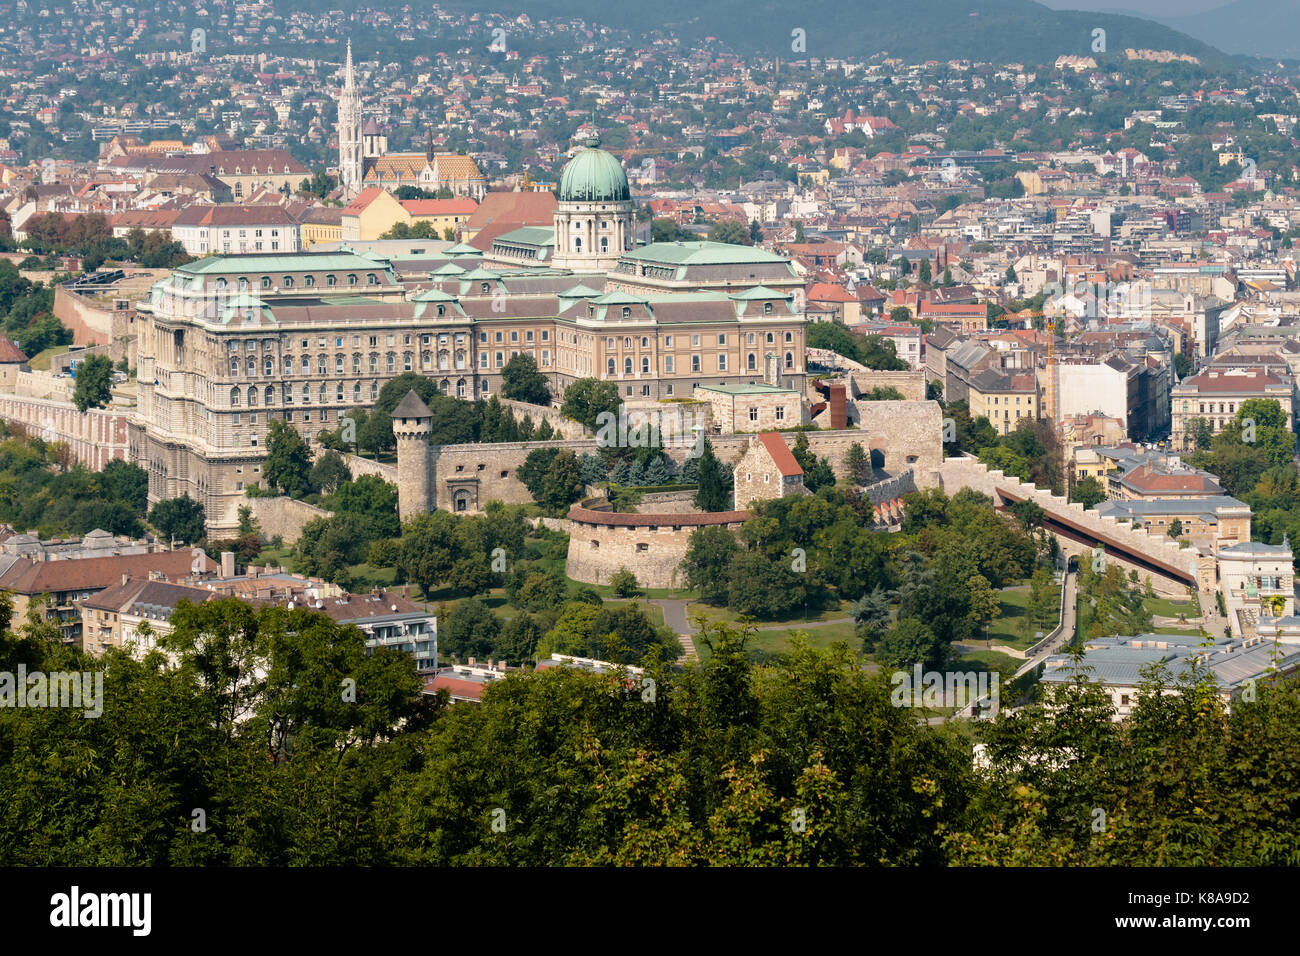 The famous Buda Castle in Budapest in Hungary on a beautiful day. Stock Photo